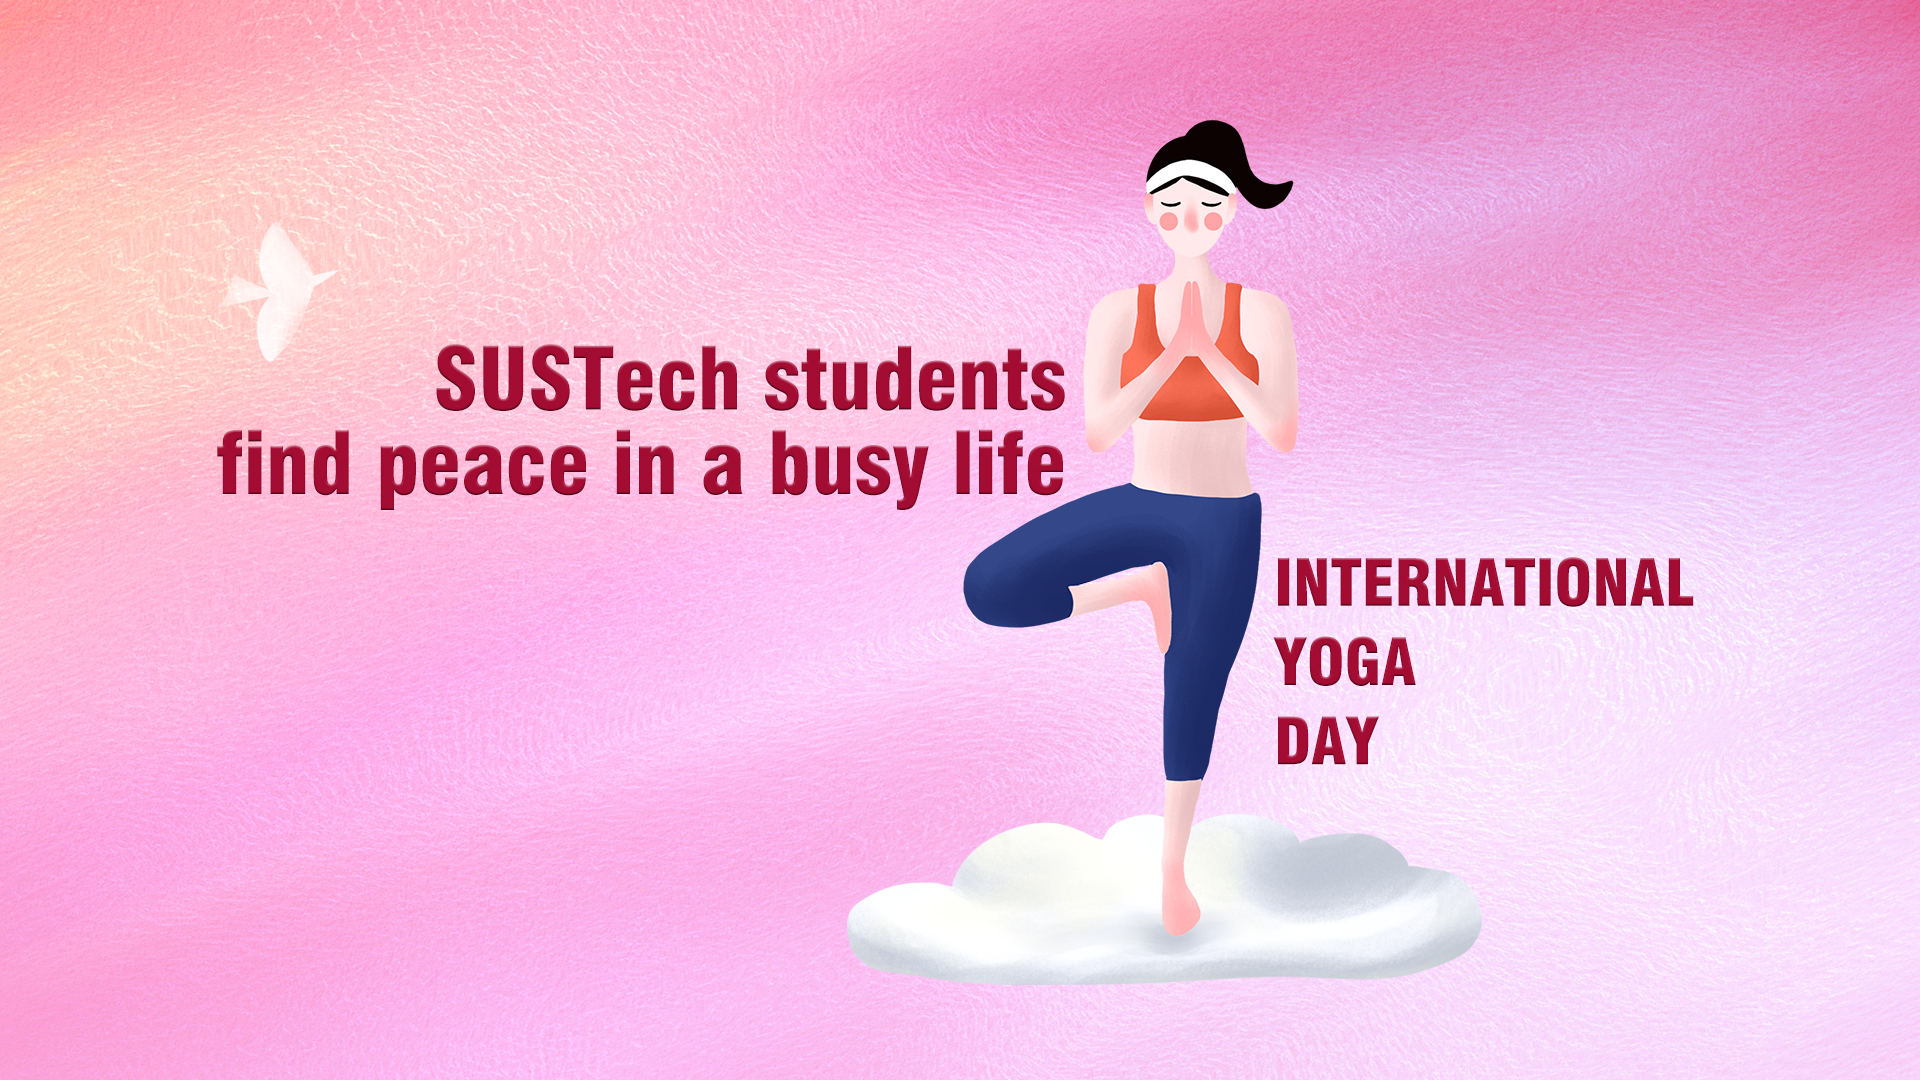 International Yoga Day: SUSTech students find peace in a busy life